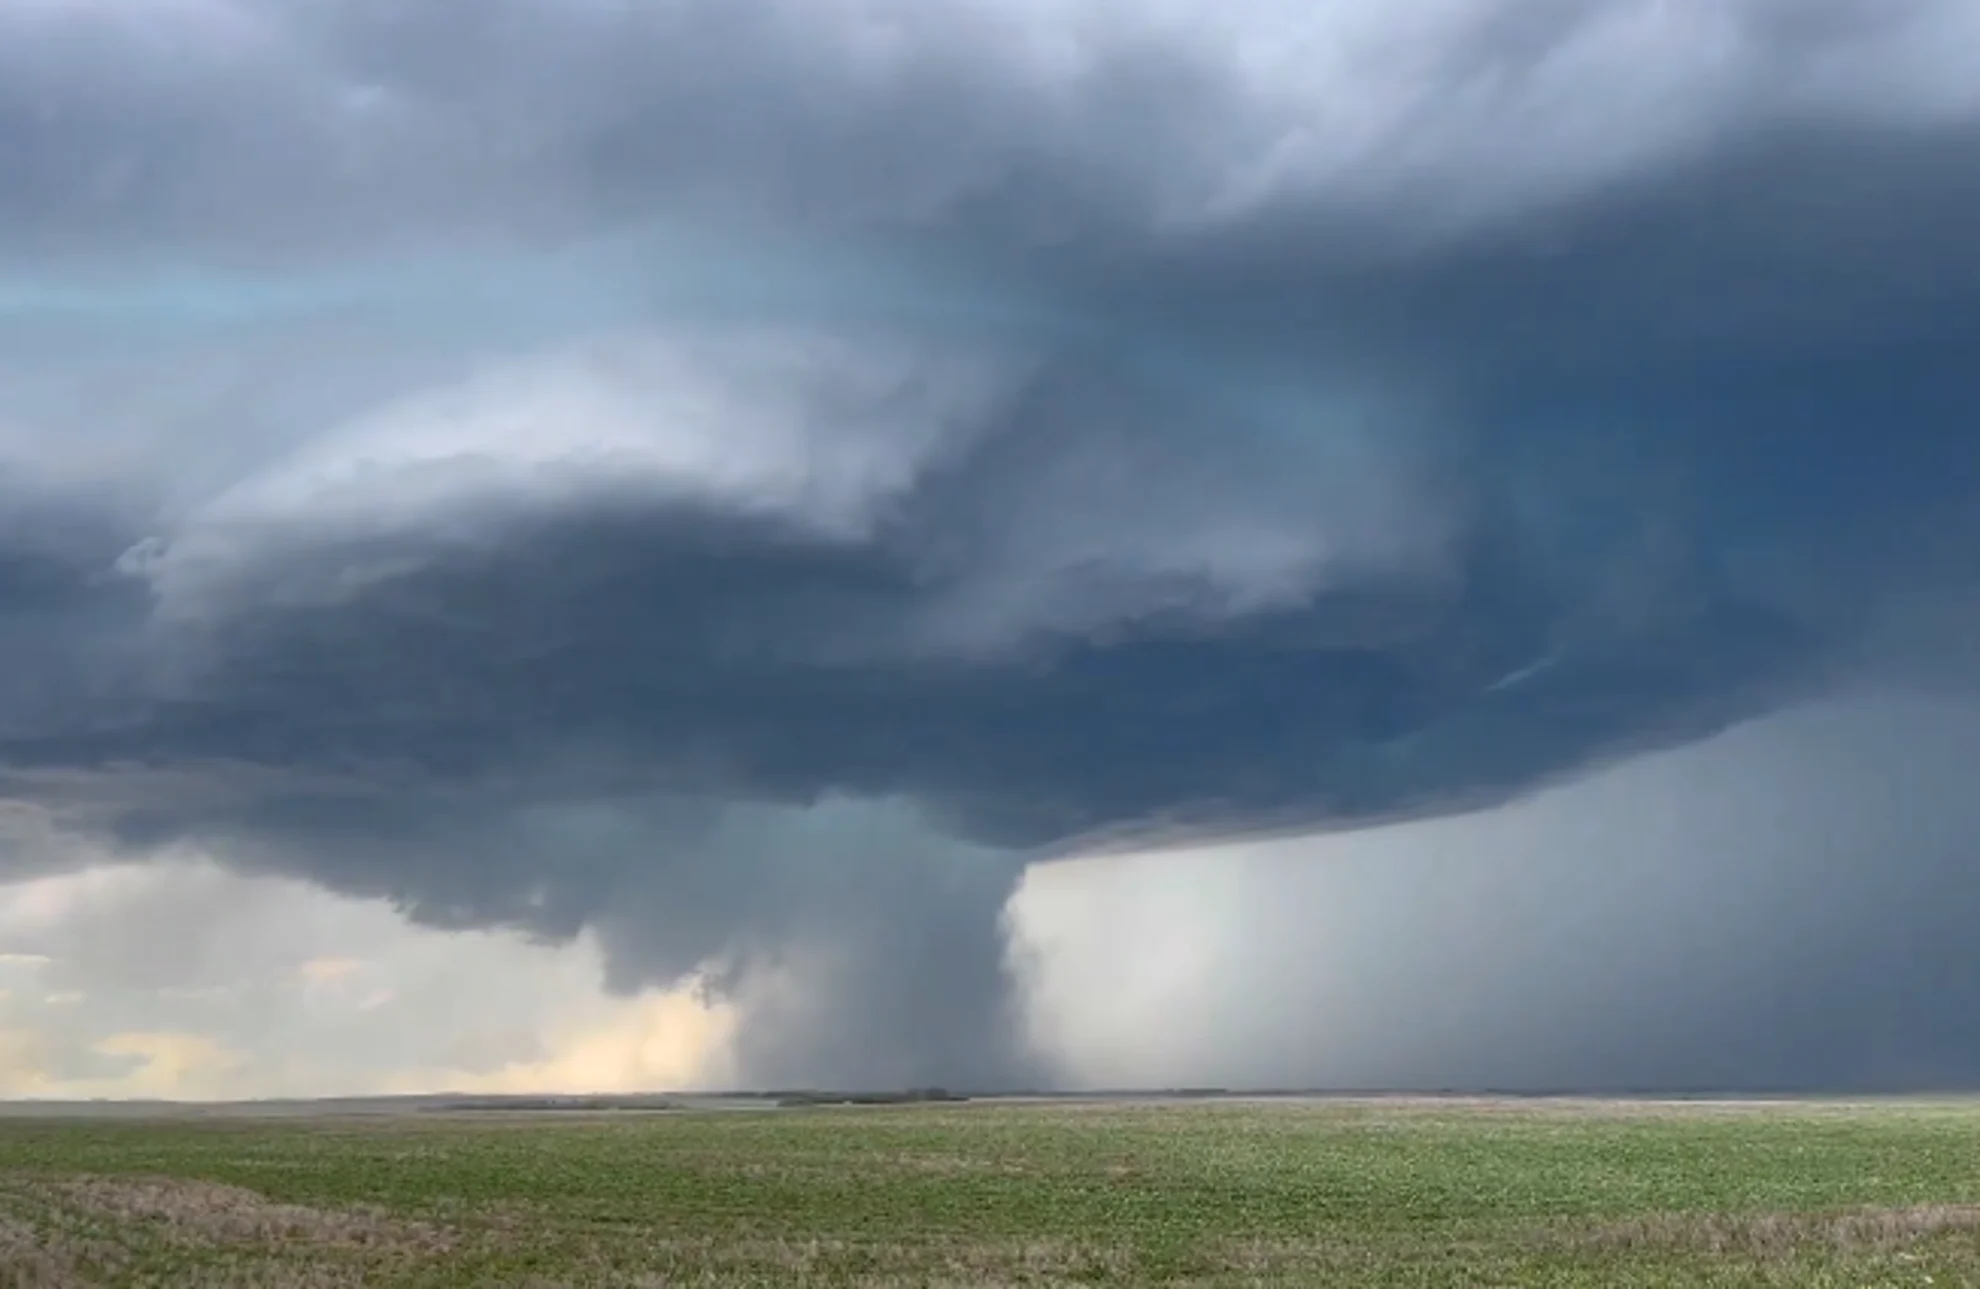 Sunday's severe weather outbreak prompted six concurrent tornado warnings over Saskatchewan. See what happened, here